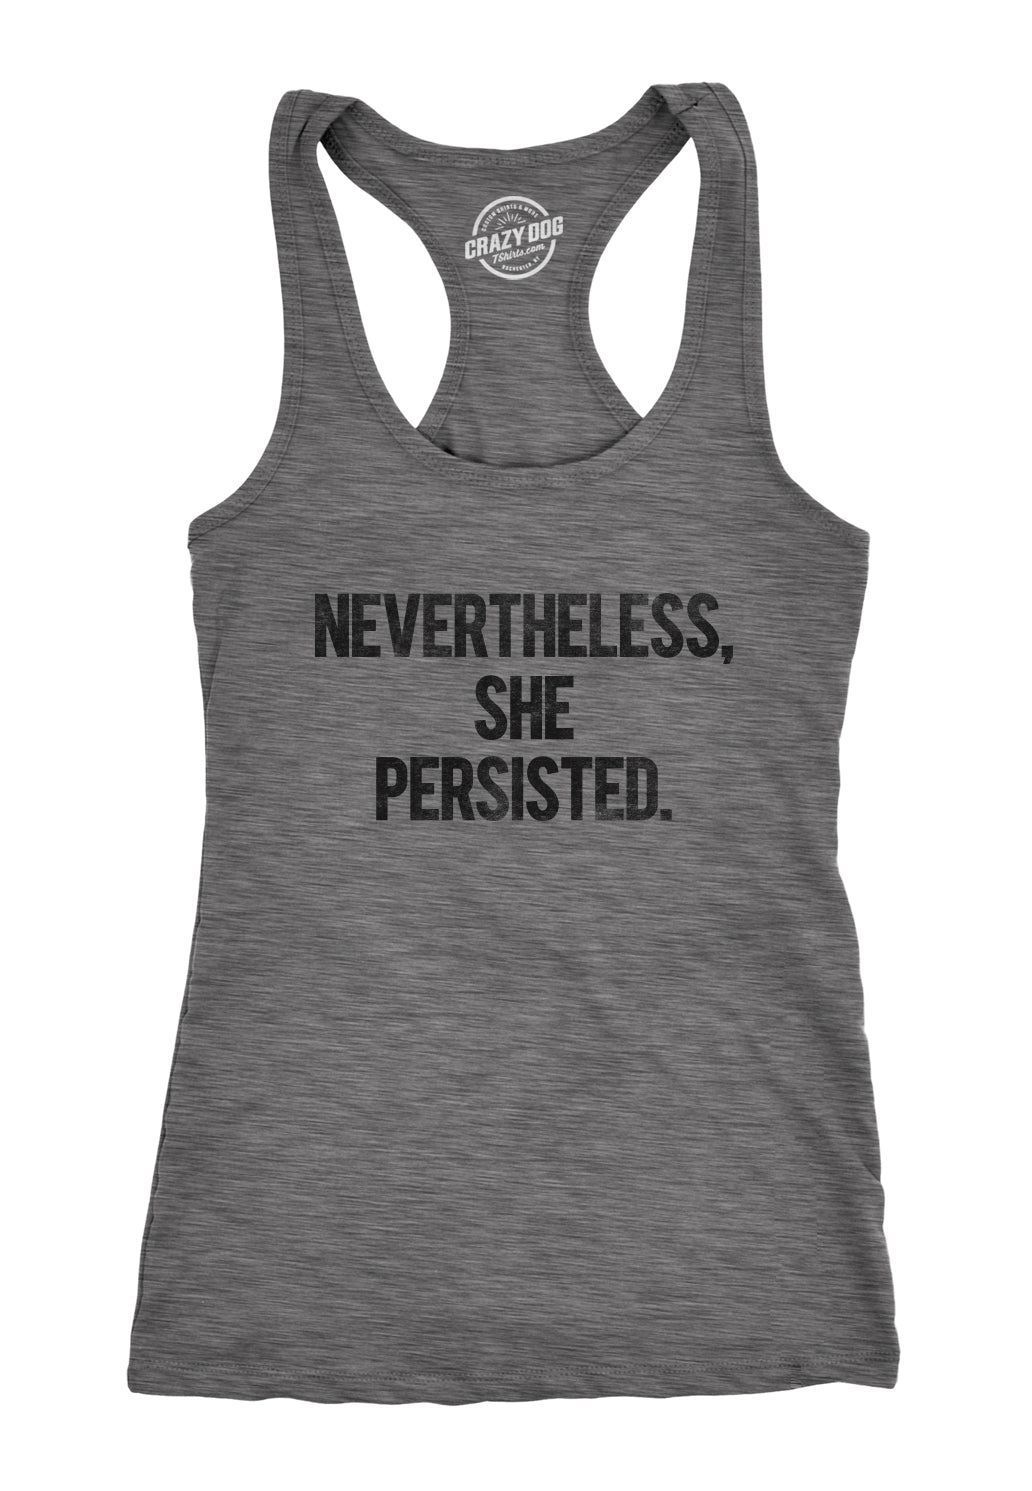 Funny Dark Heather Grey Nevertheless She Persisted Womens Tank Top Nerdy Political Tee